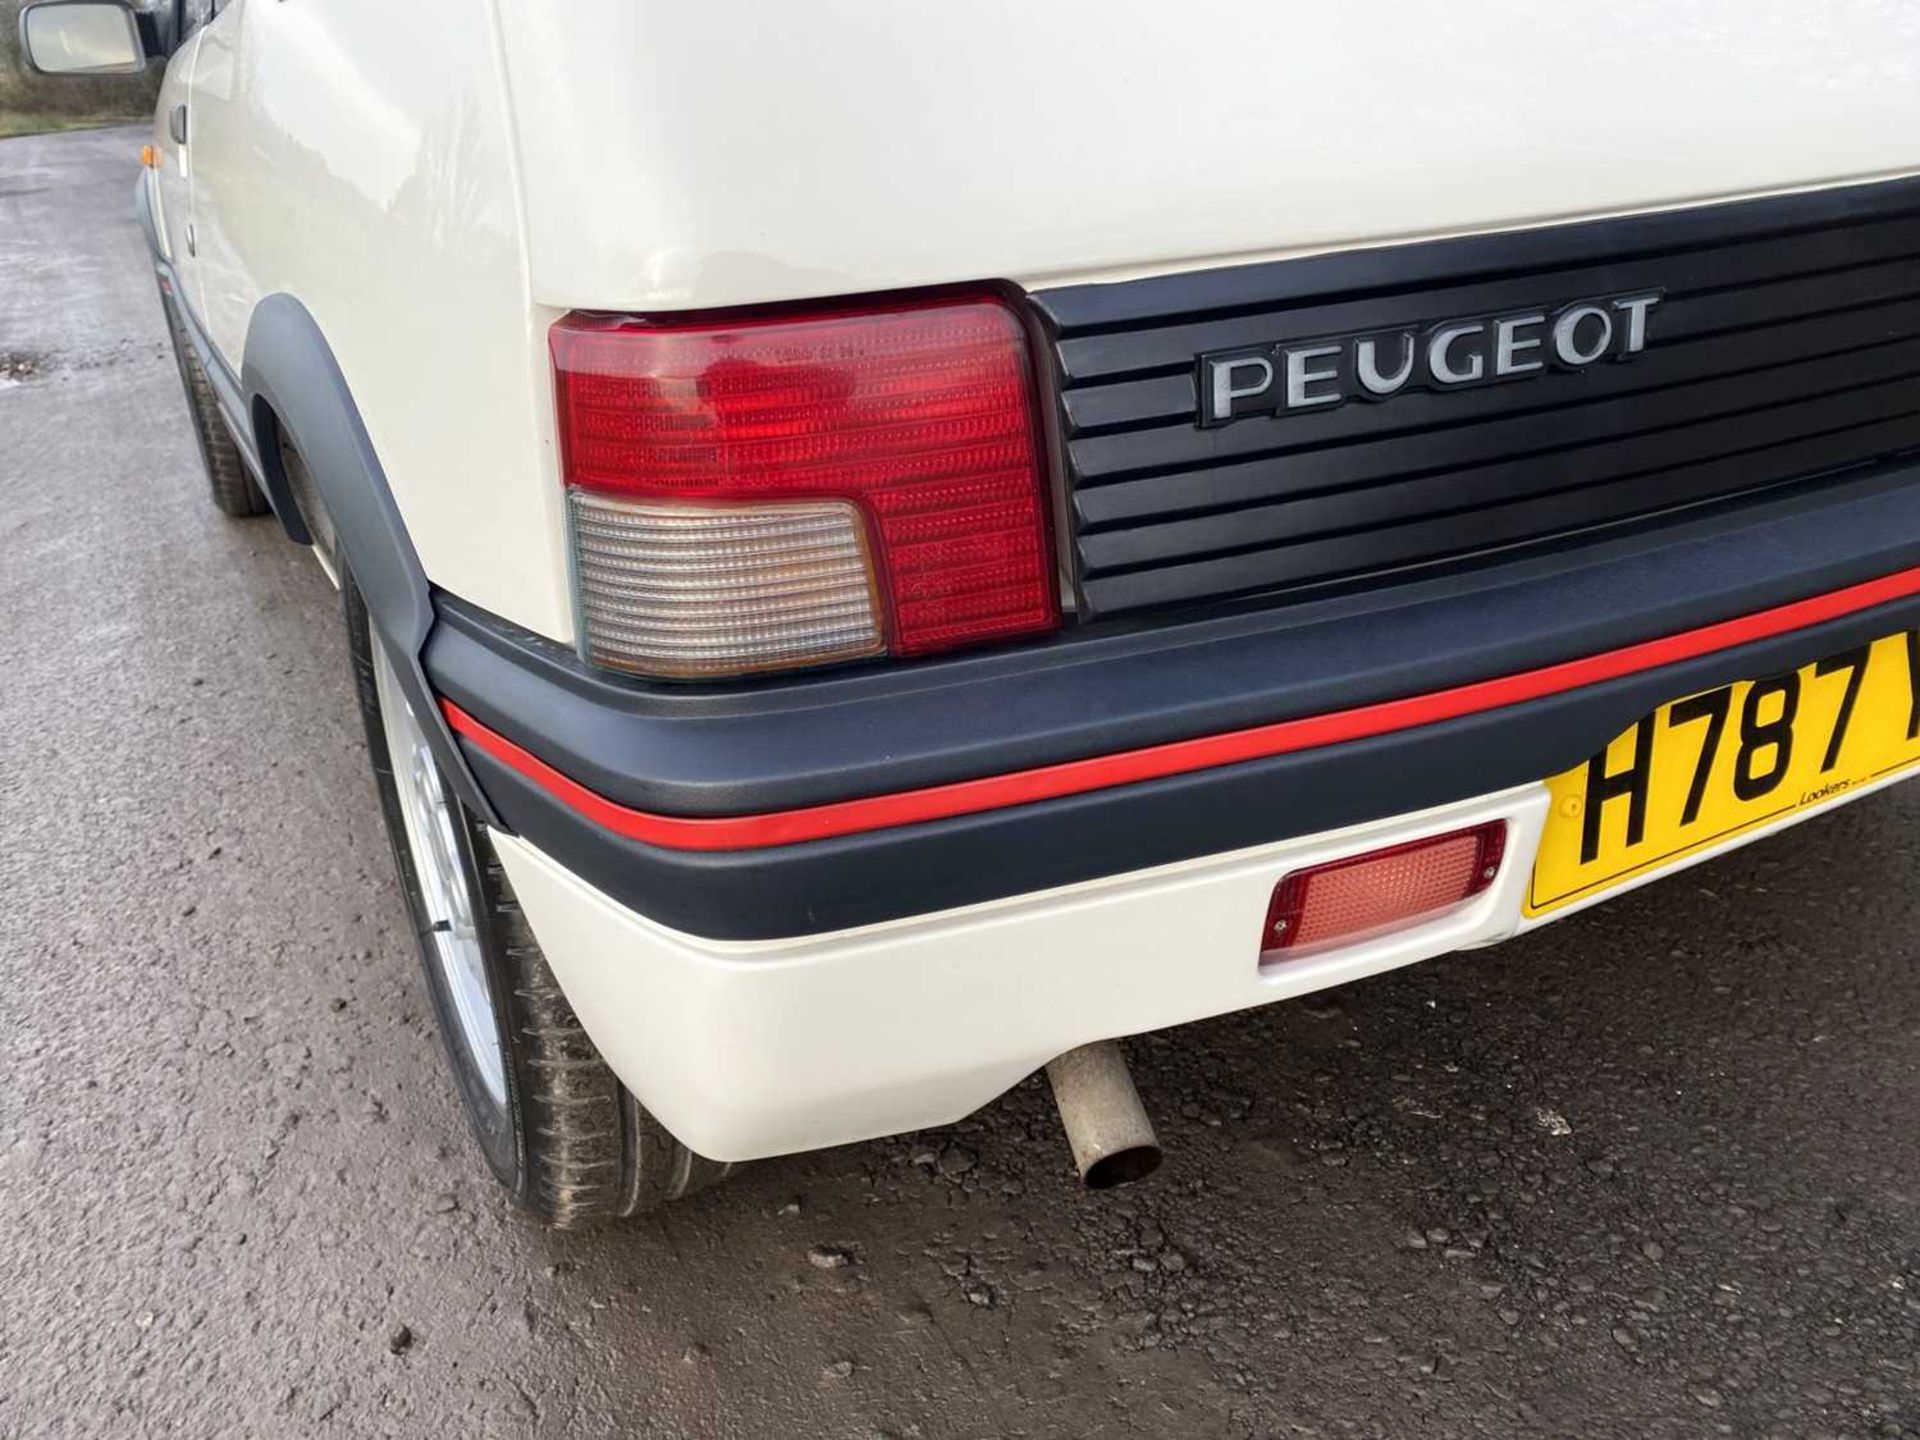 1990 Peugeot 205 GTi 1.6 Only 56,000 miles, same owner for 16 years - Image 56 of 81